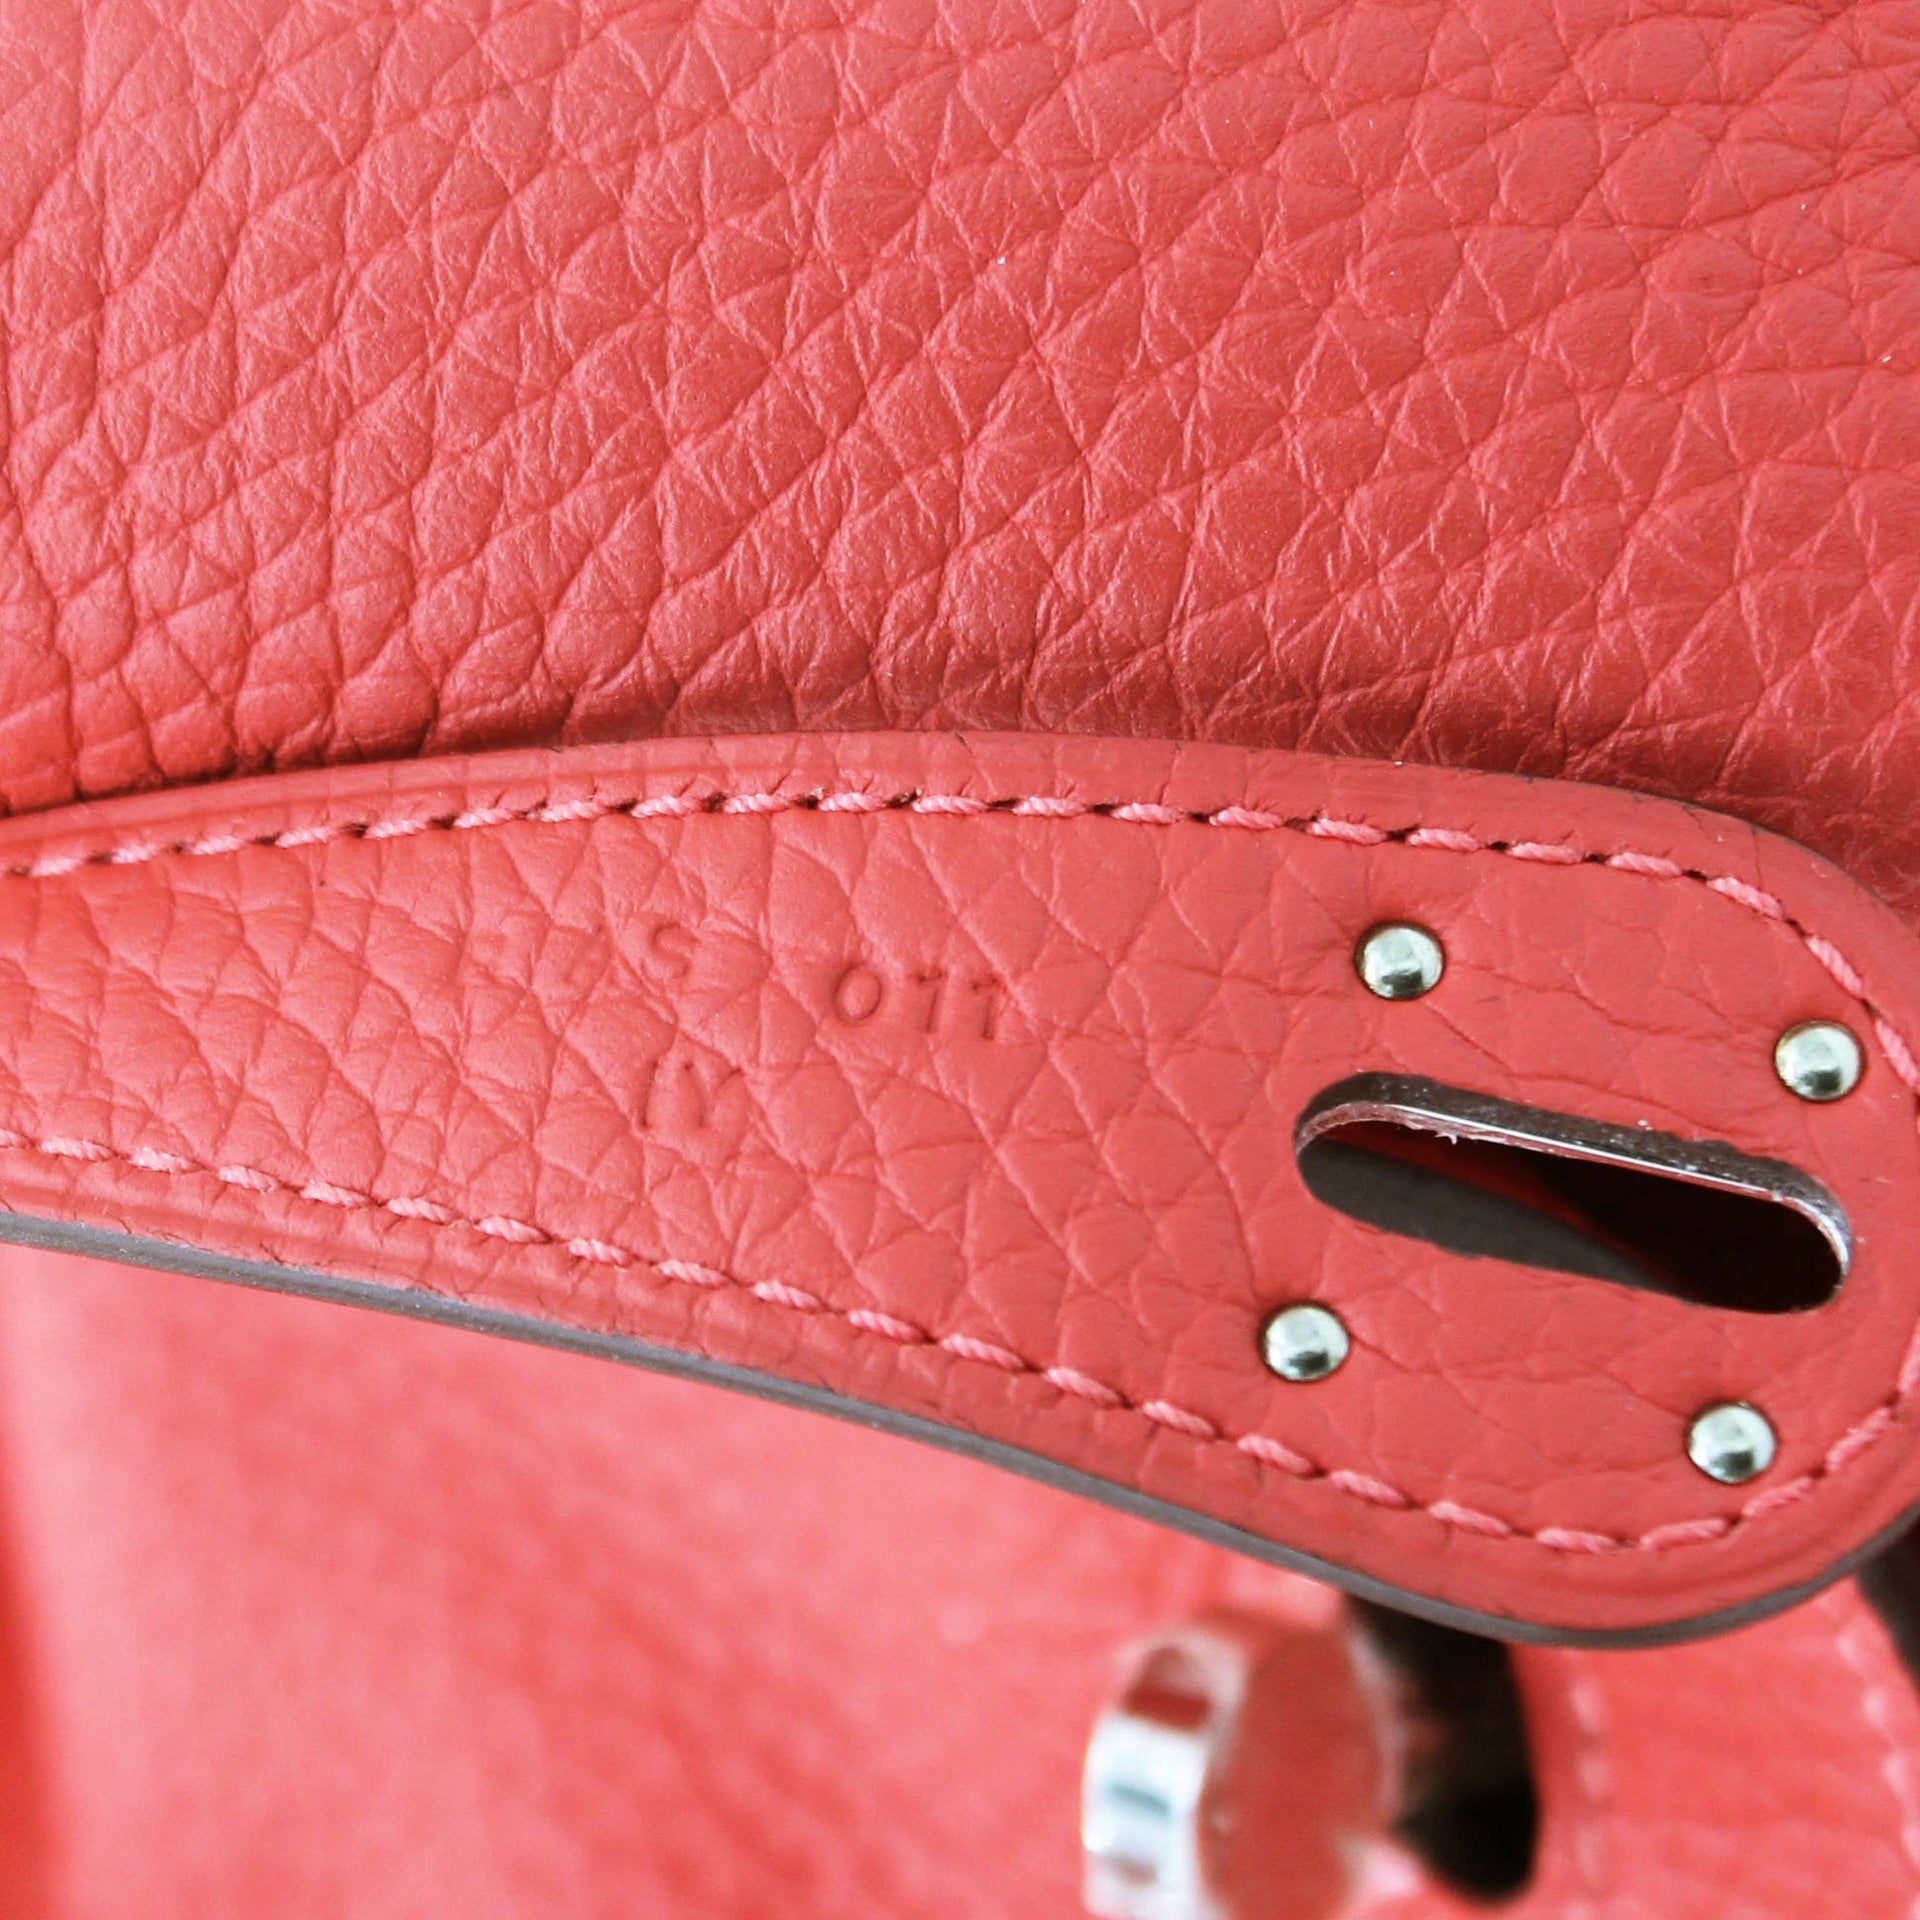 A ROUGE TOMATE CLÉMENCE LEATHER LINDY 26 WITH PALLADIUM HARDWARE, HERMÈS,  2016